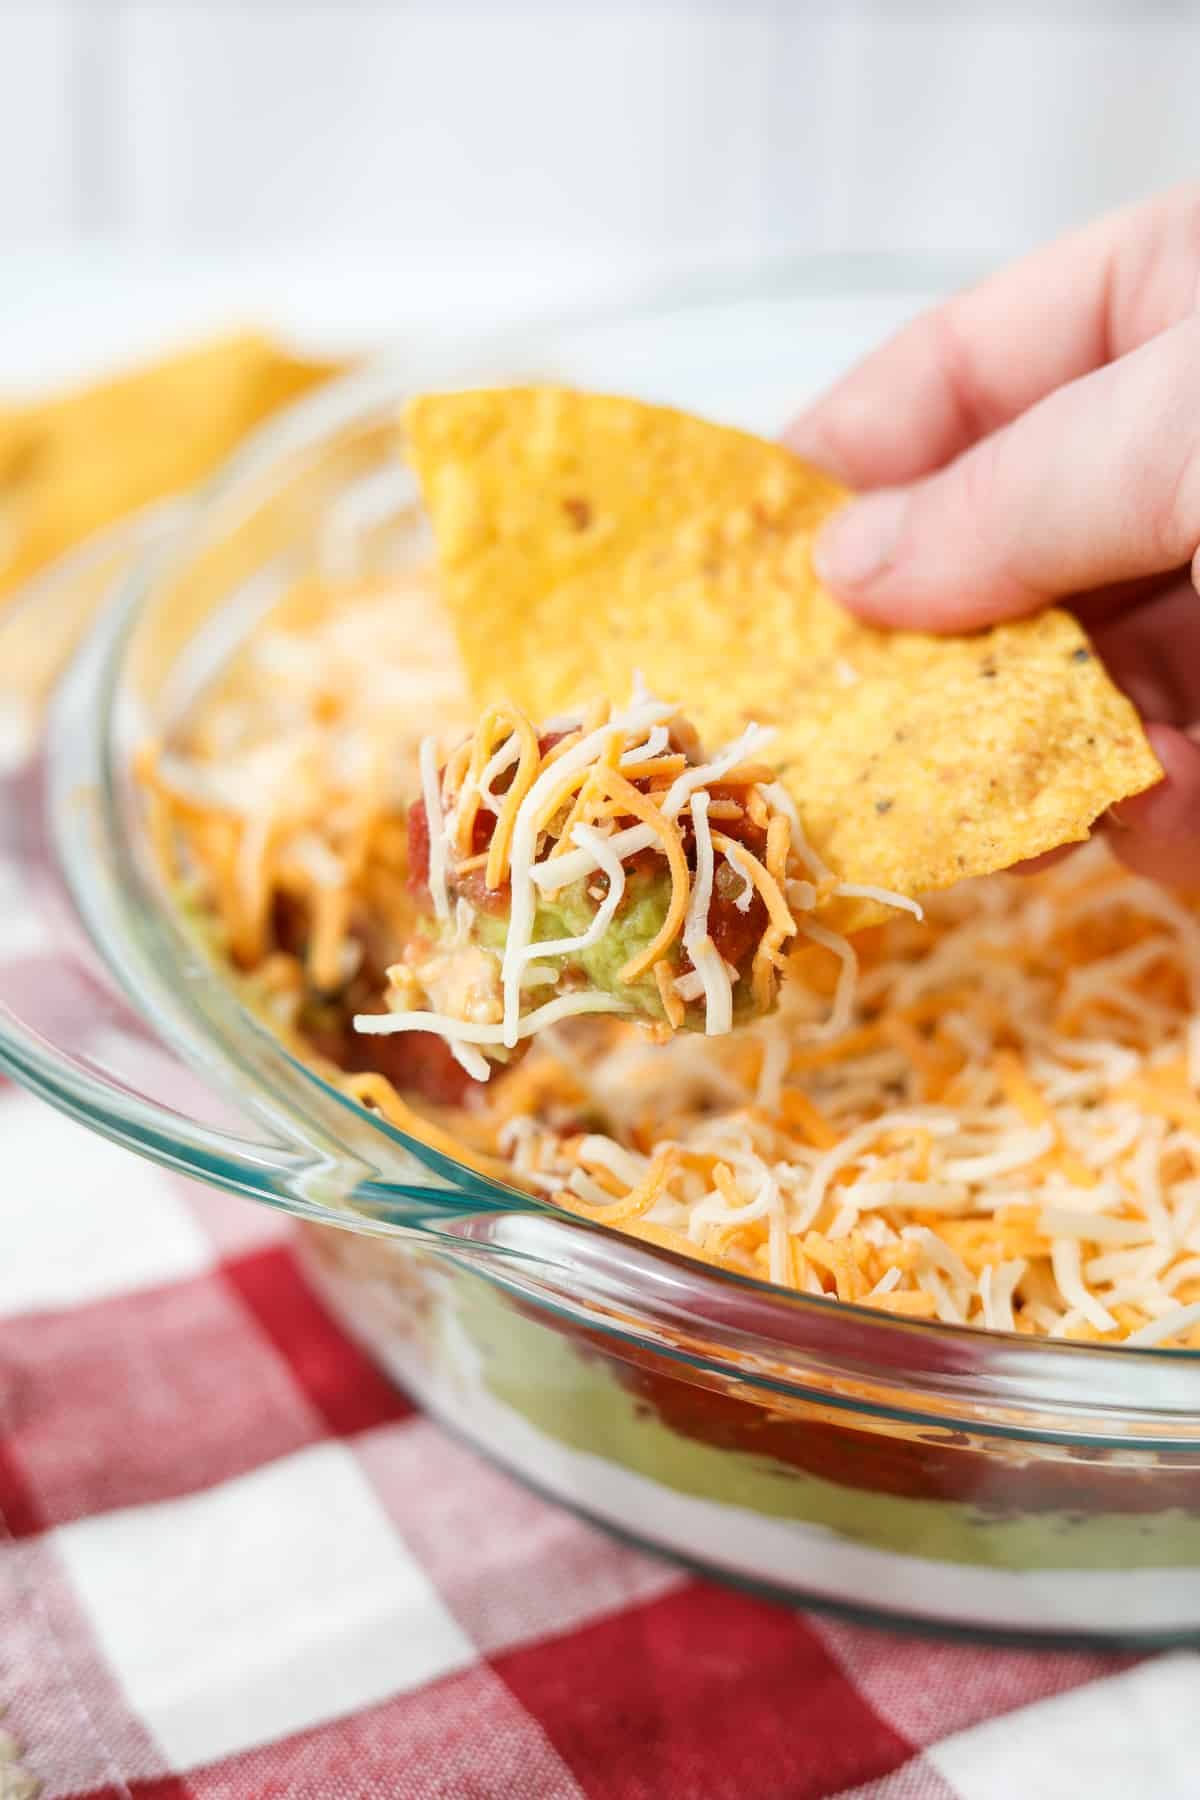 A tortilla chip dipped into a cold layer dip.